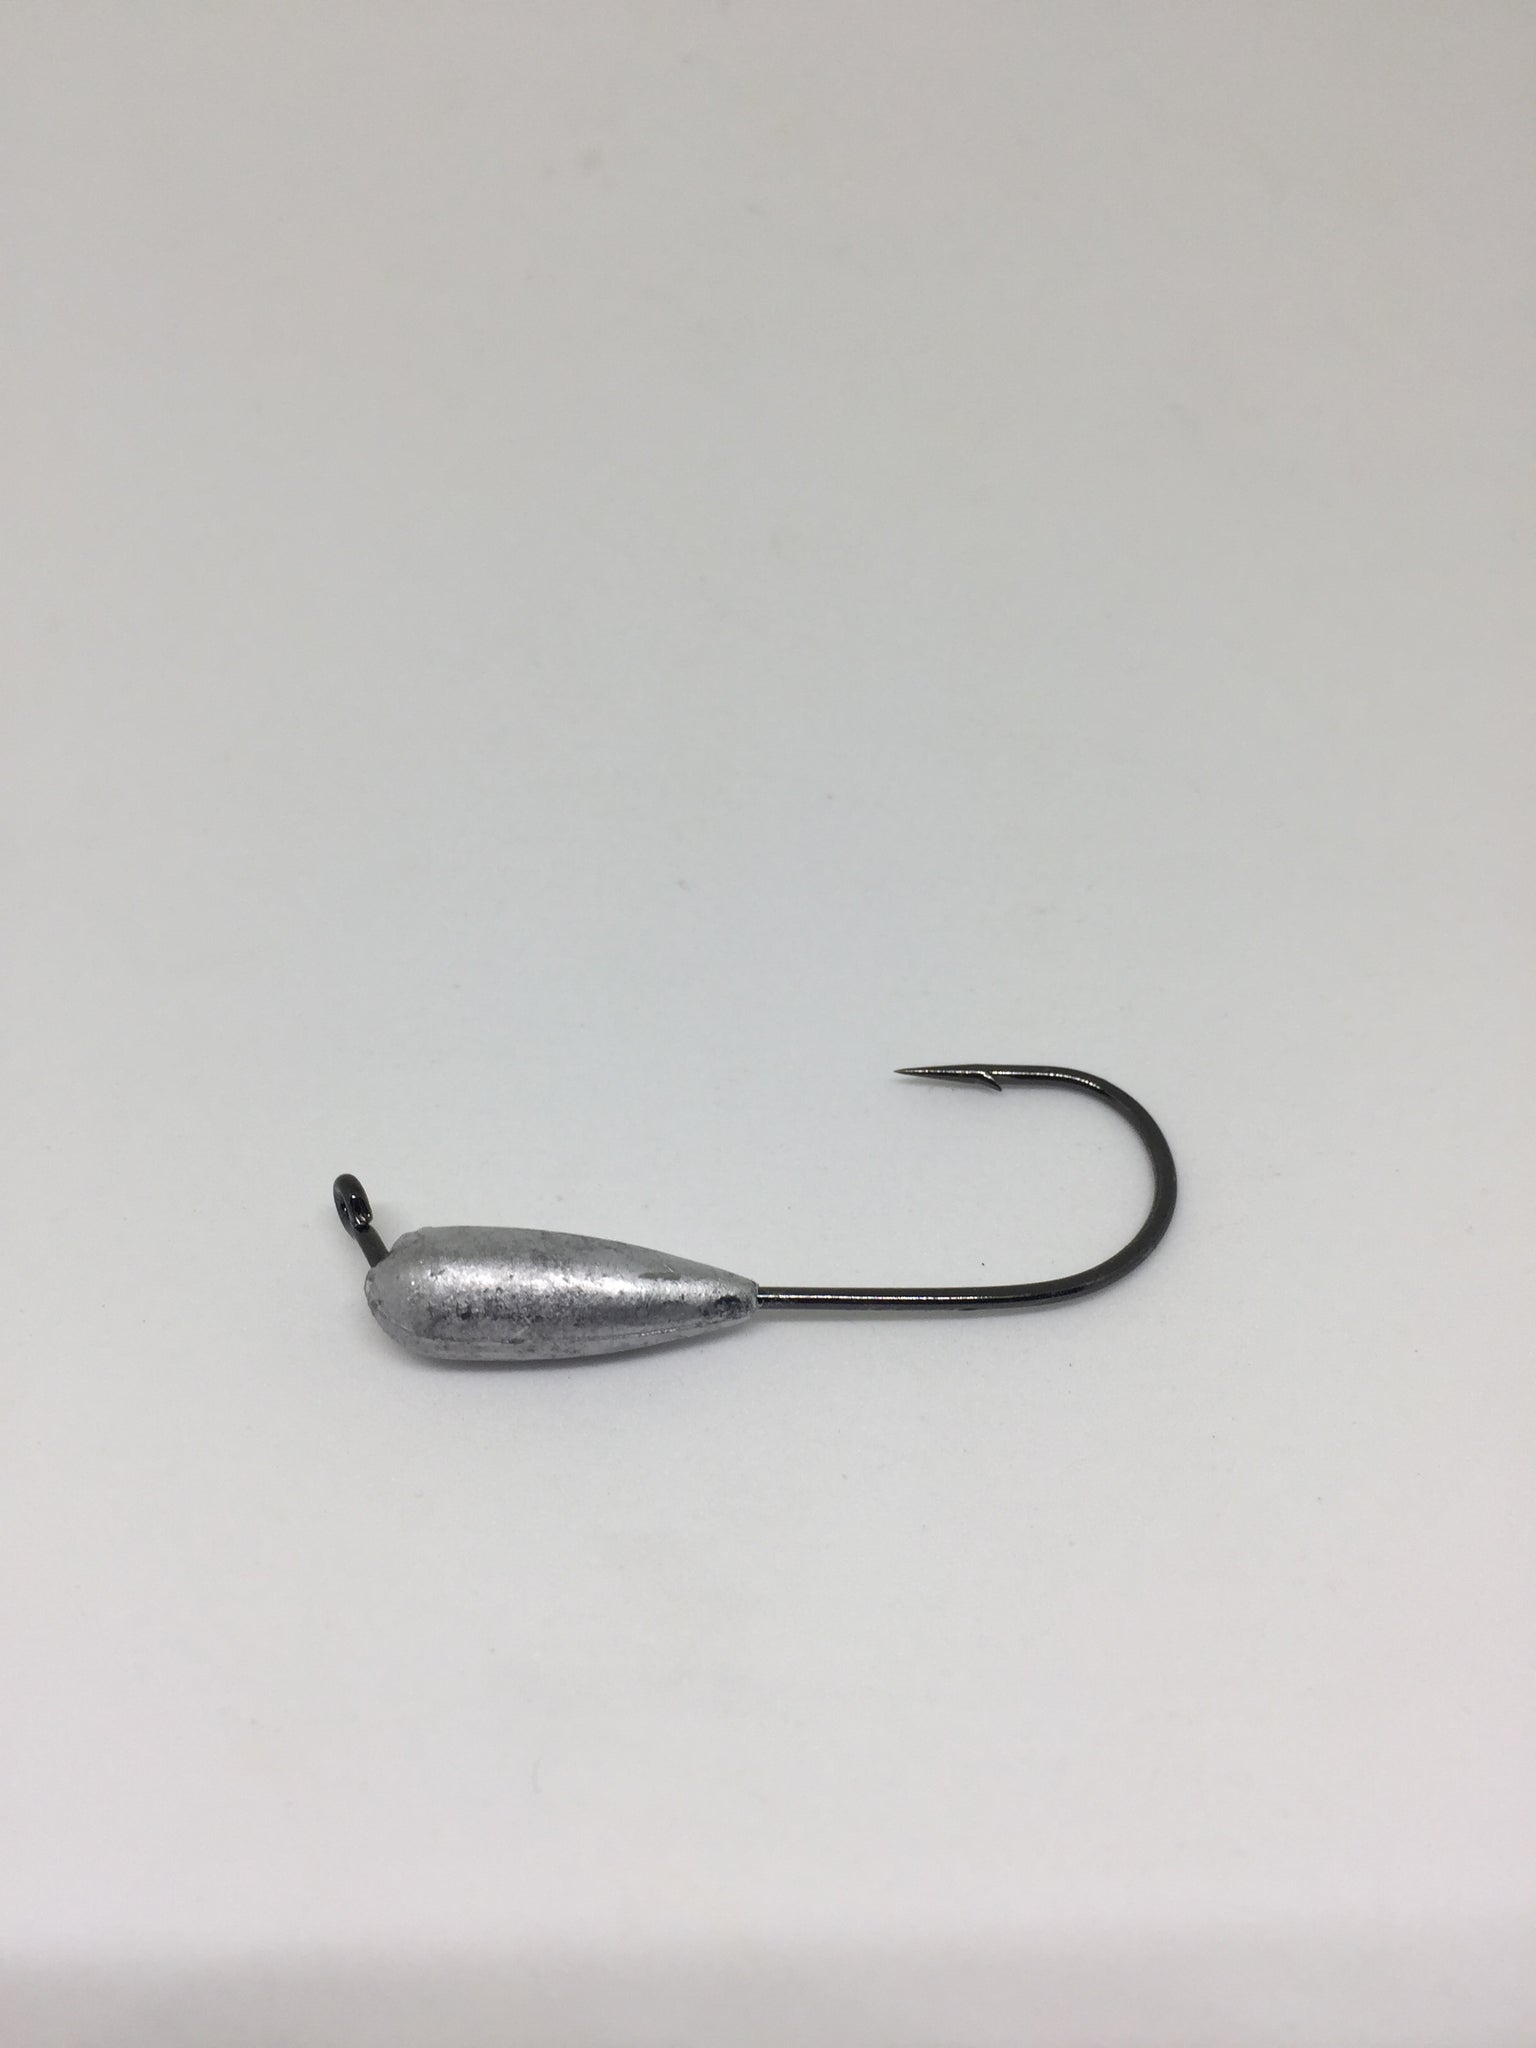 Lunch Money Tube Jig Heads – Fishing Complete Inc